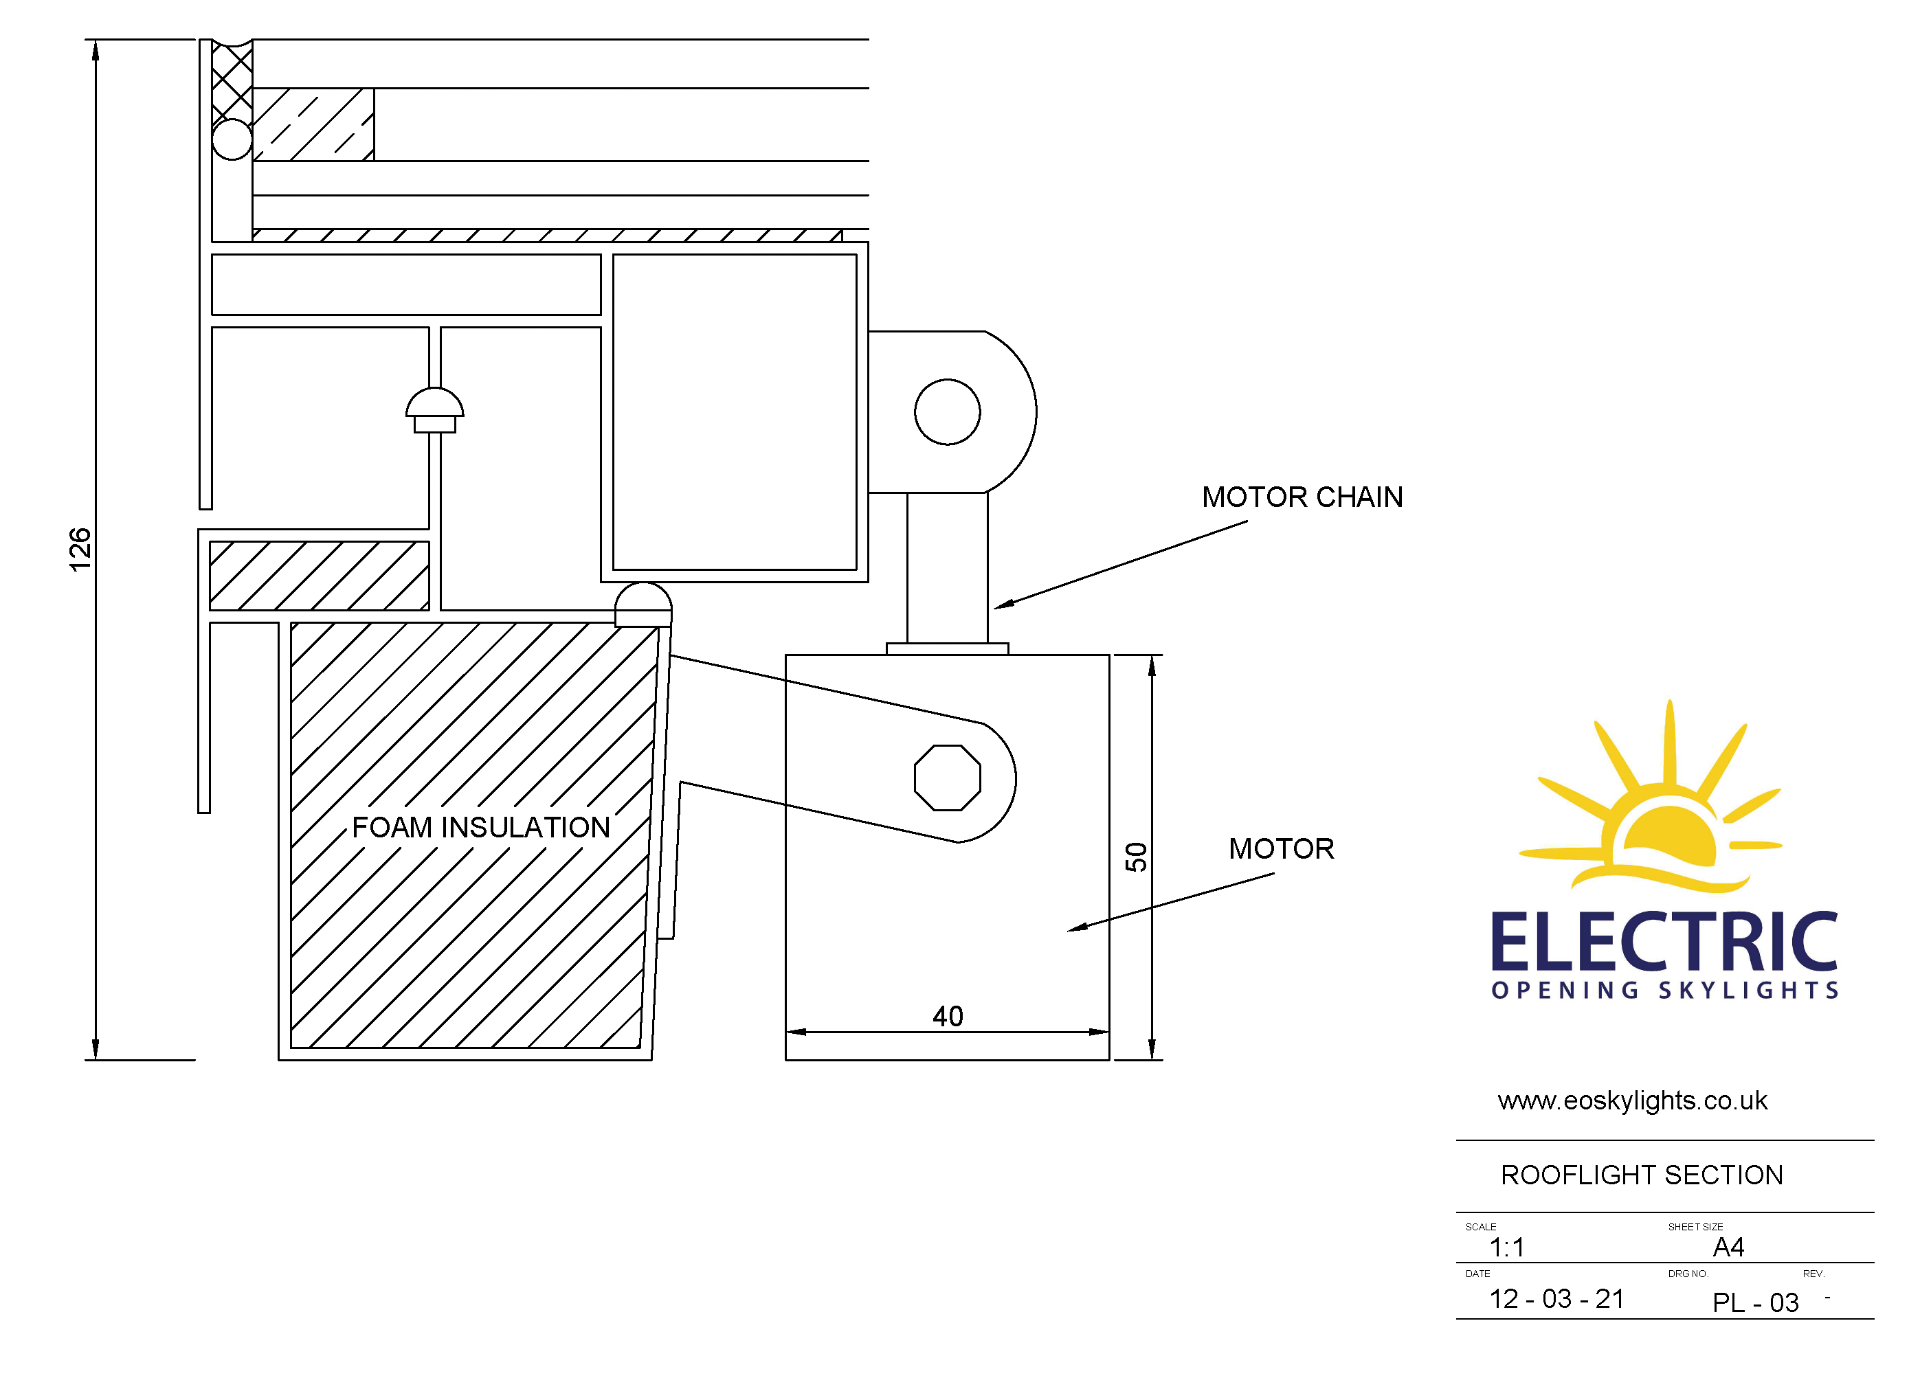 Panoroof (EOS)Electric Opening Skylight 1000x2000mm - Aluminiun Frame Double Glazed Laminated Self- - Image 4 of 6